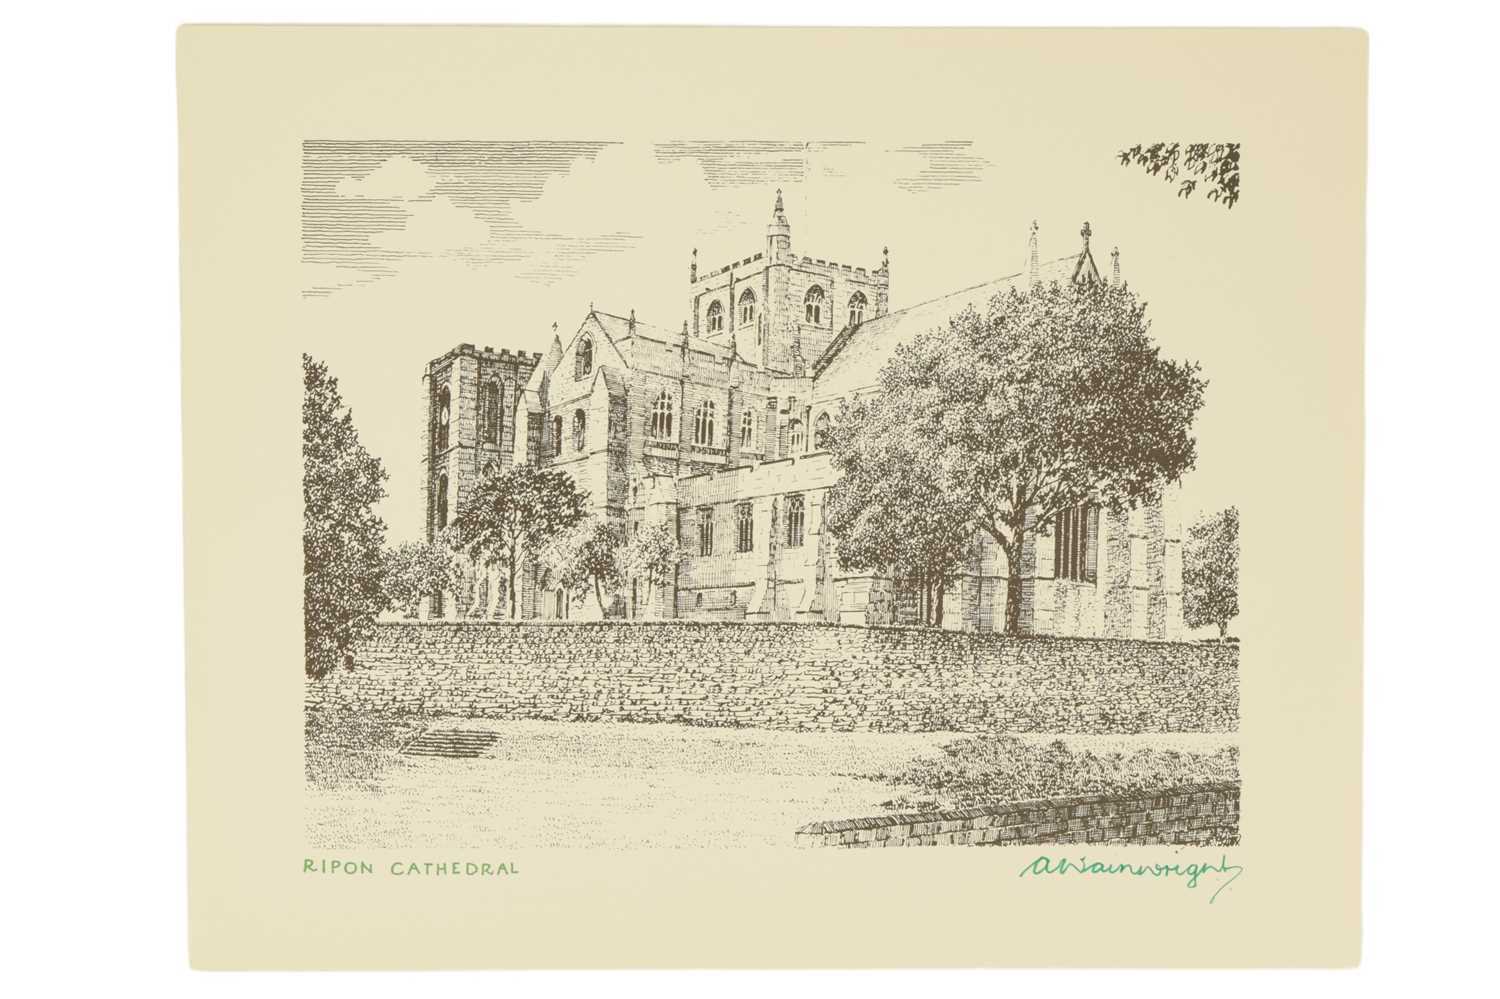 Alfred Wainwright (1907-1991) “Ripon Cathedral”, a bold, architectural study of the medieval